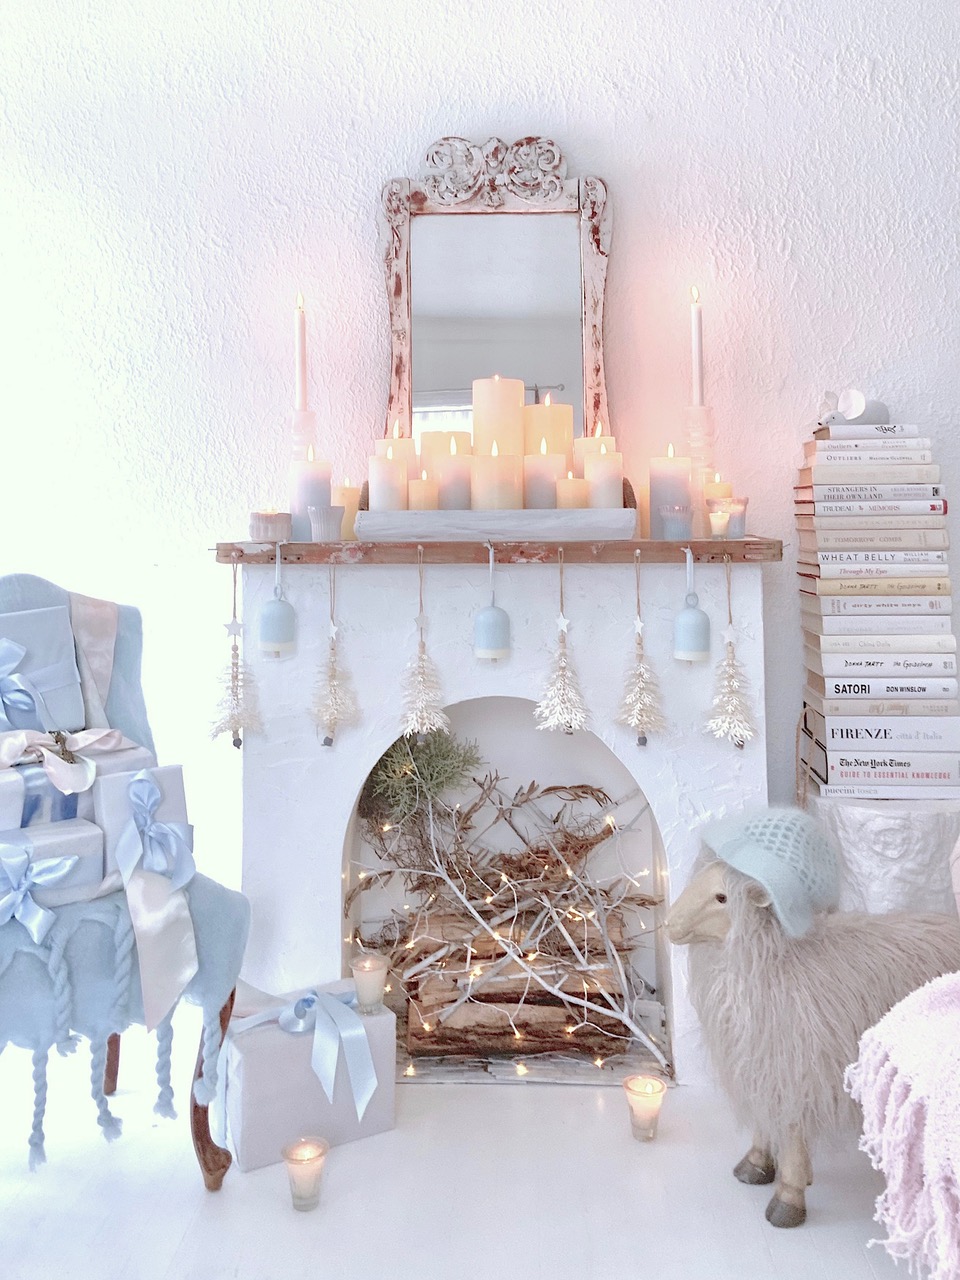 Fifi O'Neill's pastel and white Christmas ethereal style in her own home. #pastelchristmas #whitechristmasdecor